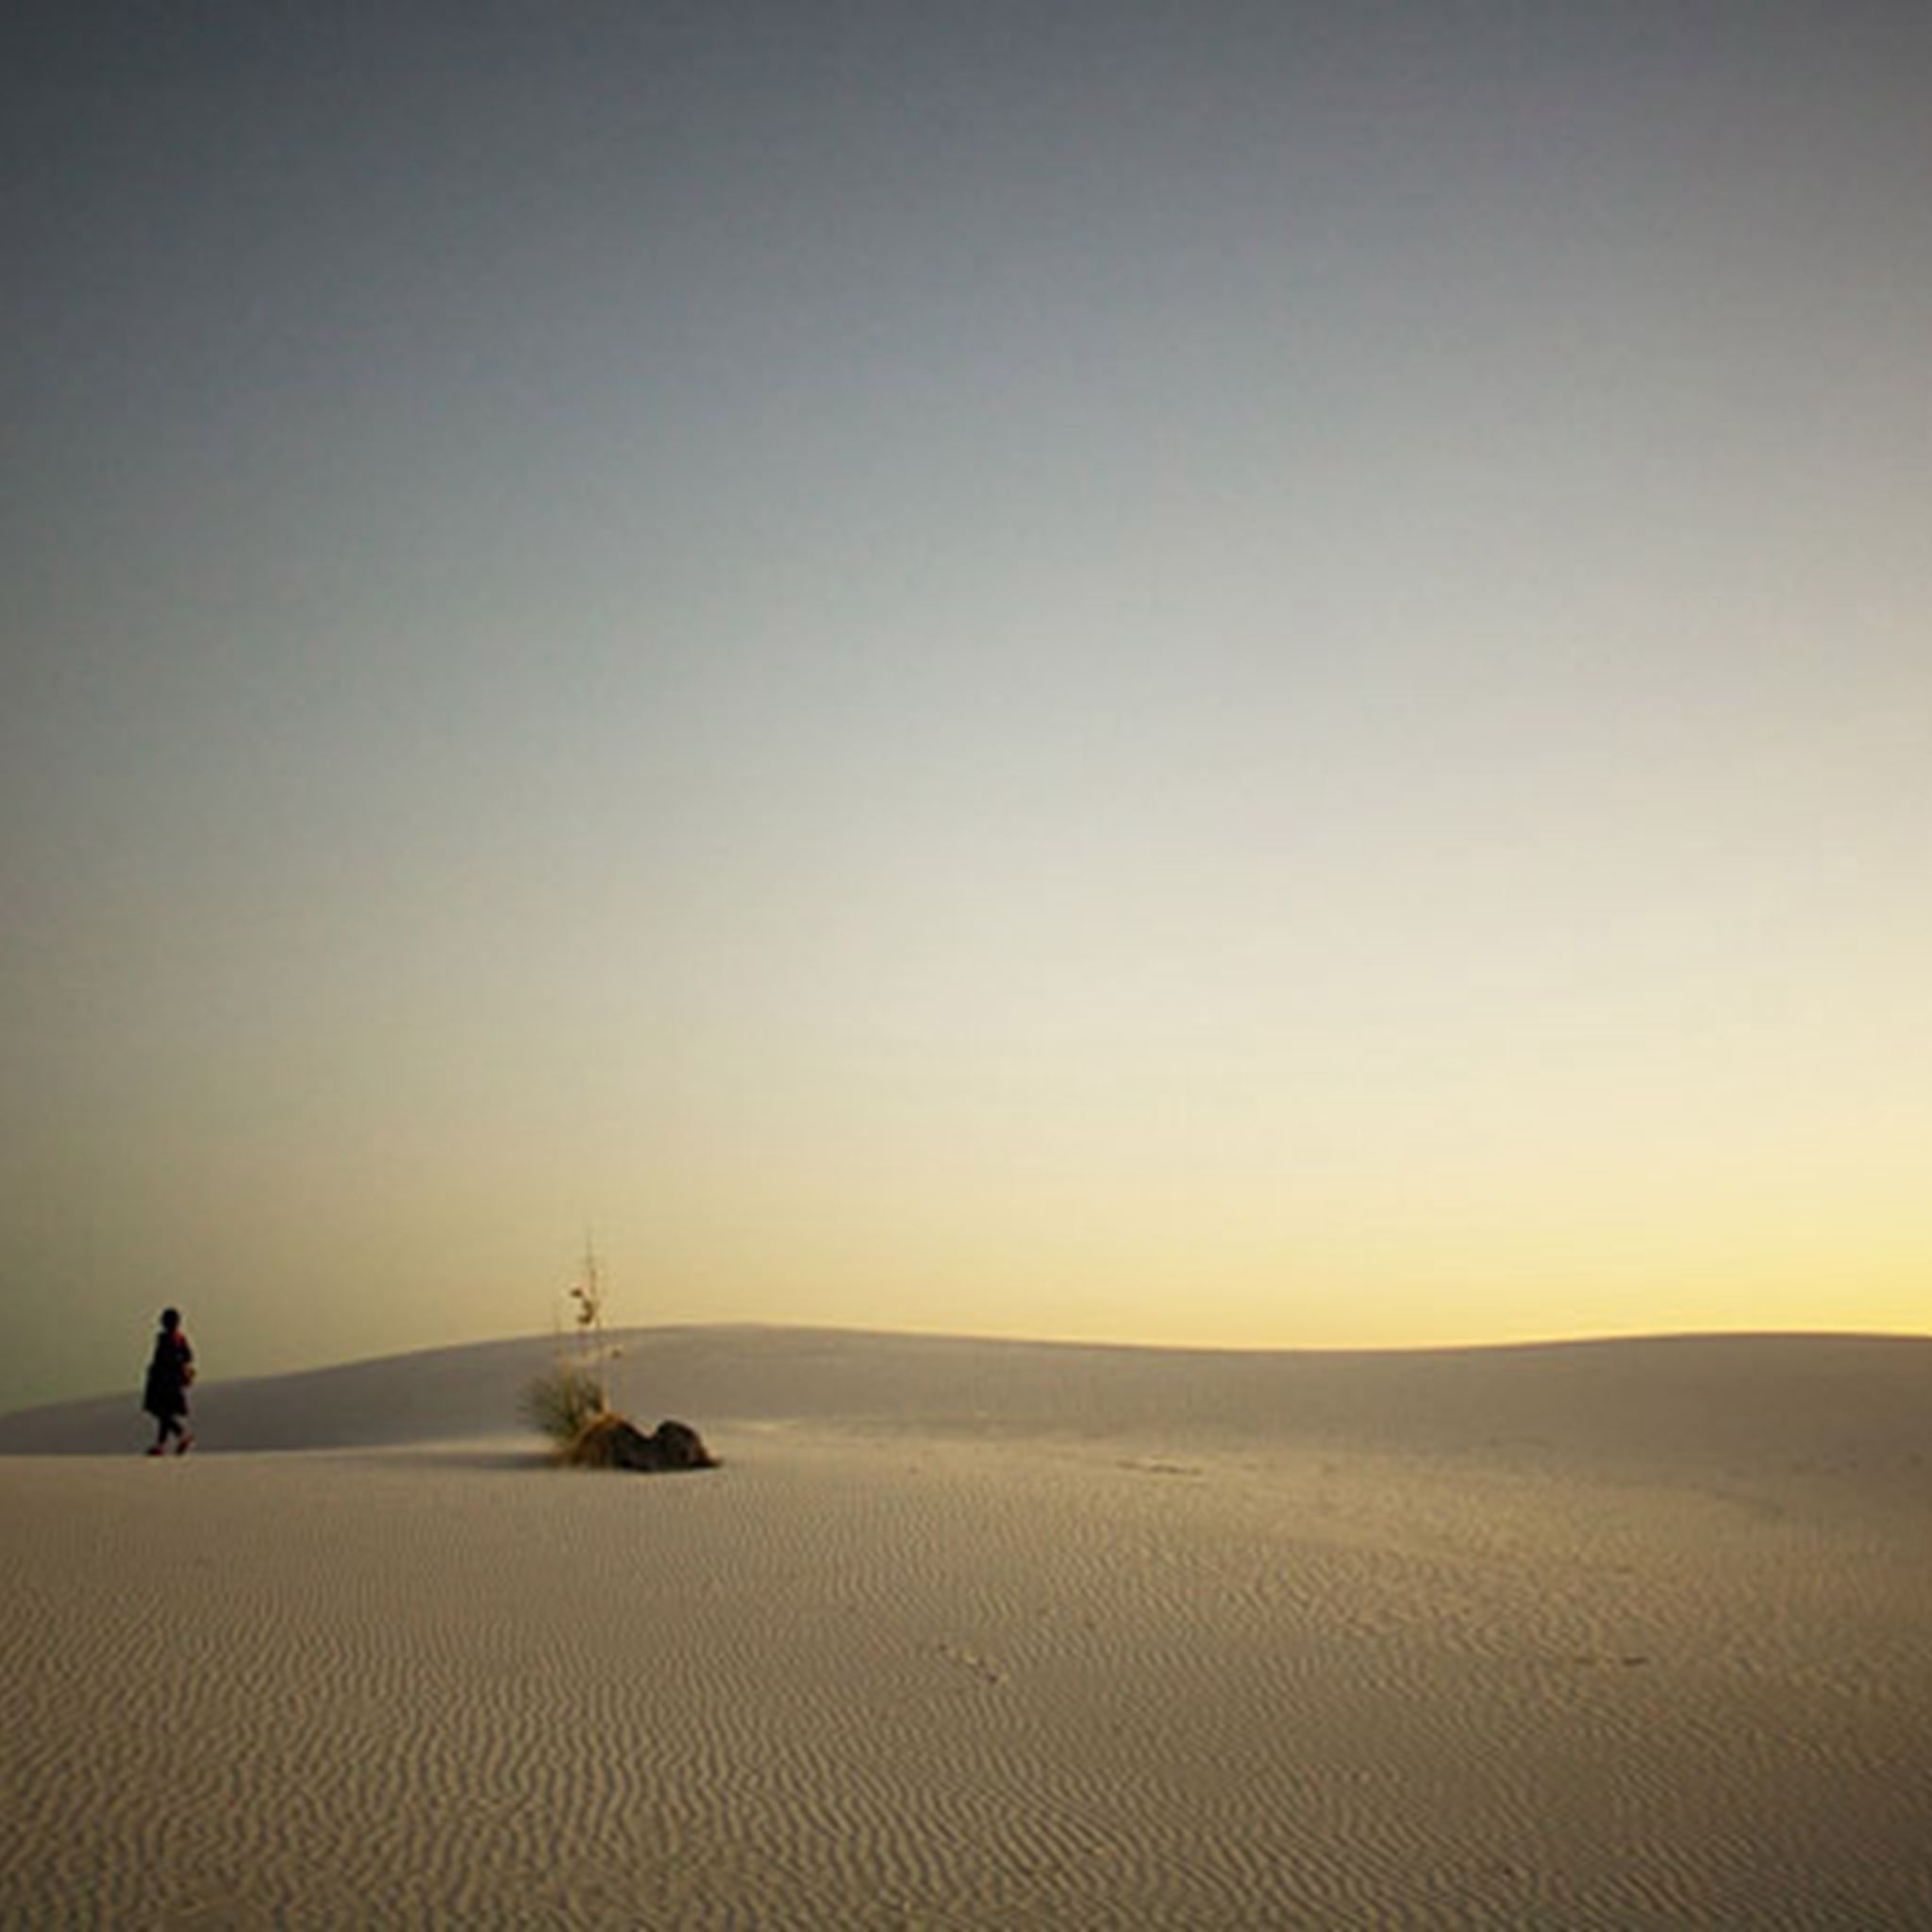 Lonely Man In Wide Endless Desert Land iPad Air wallpaper 